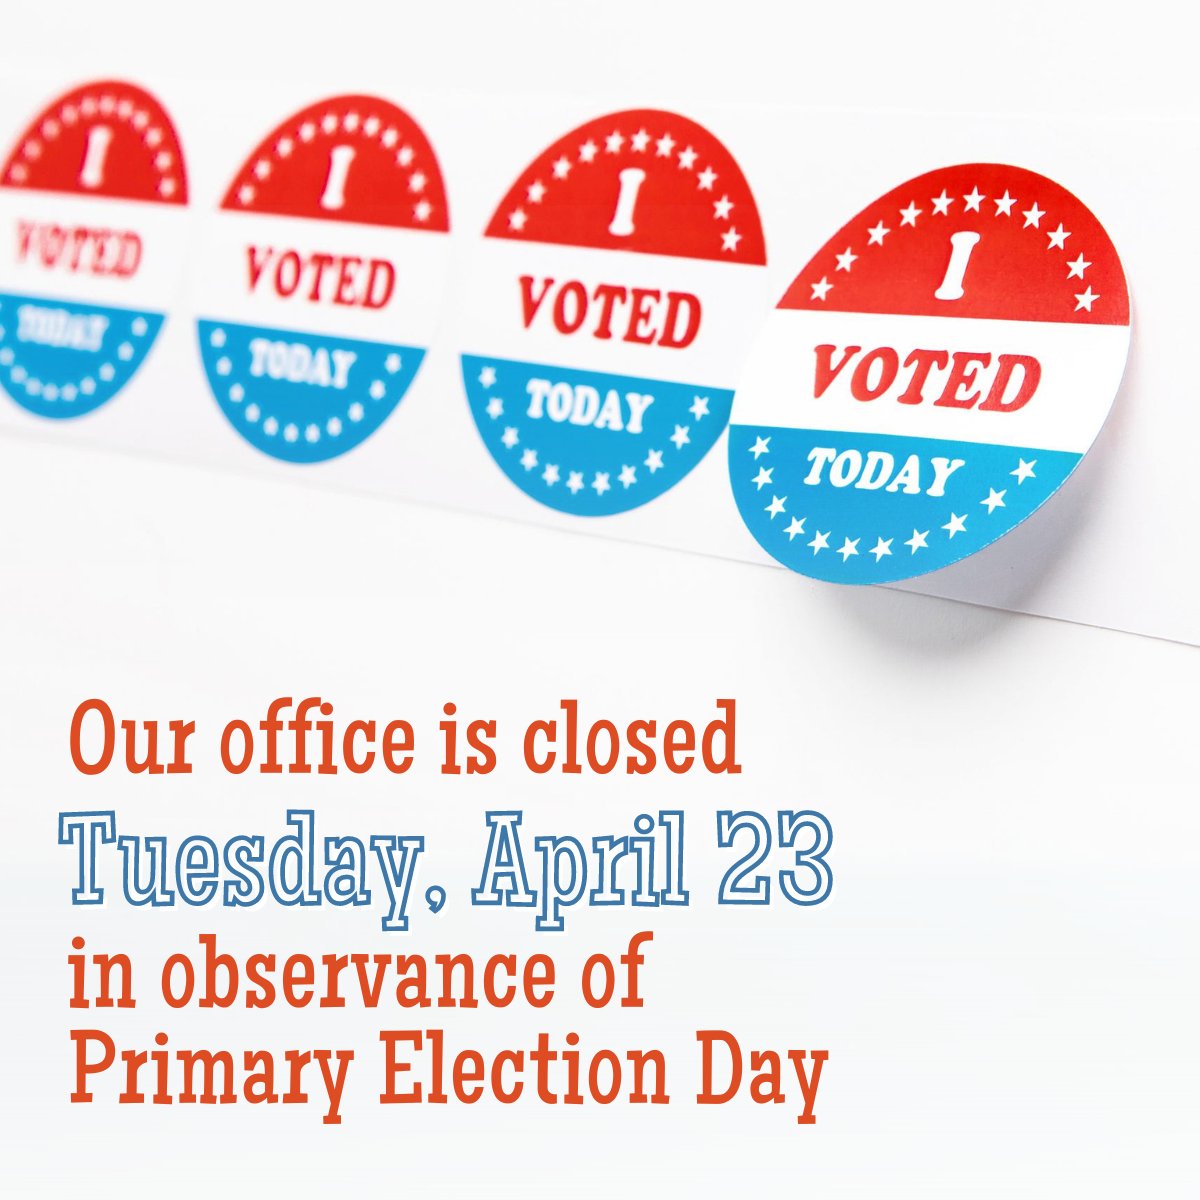 My office is closed tomorrow for the Primary Election. Your vote is your voice, make sure to use it tomorrow!